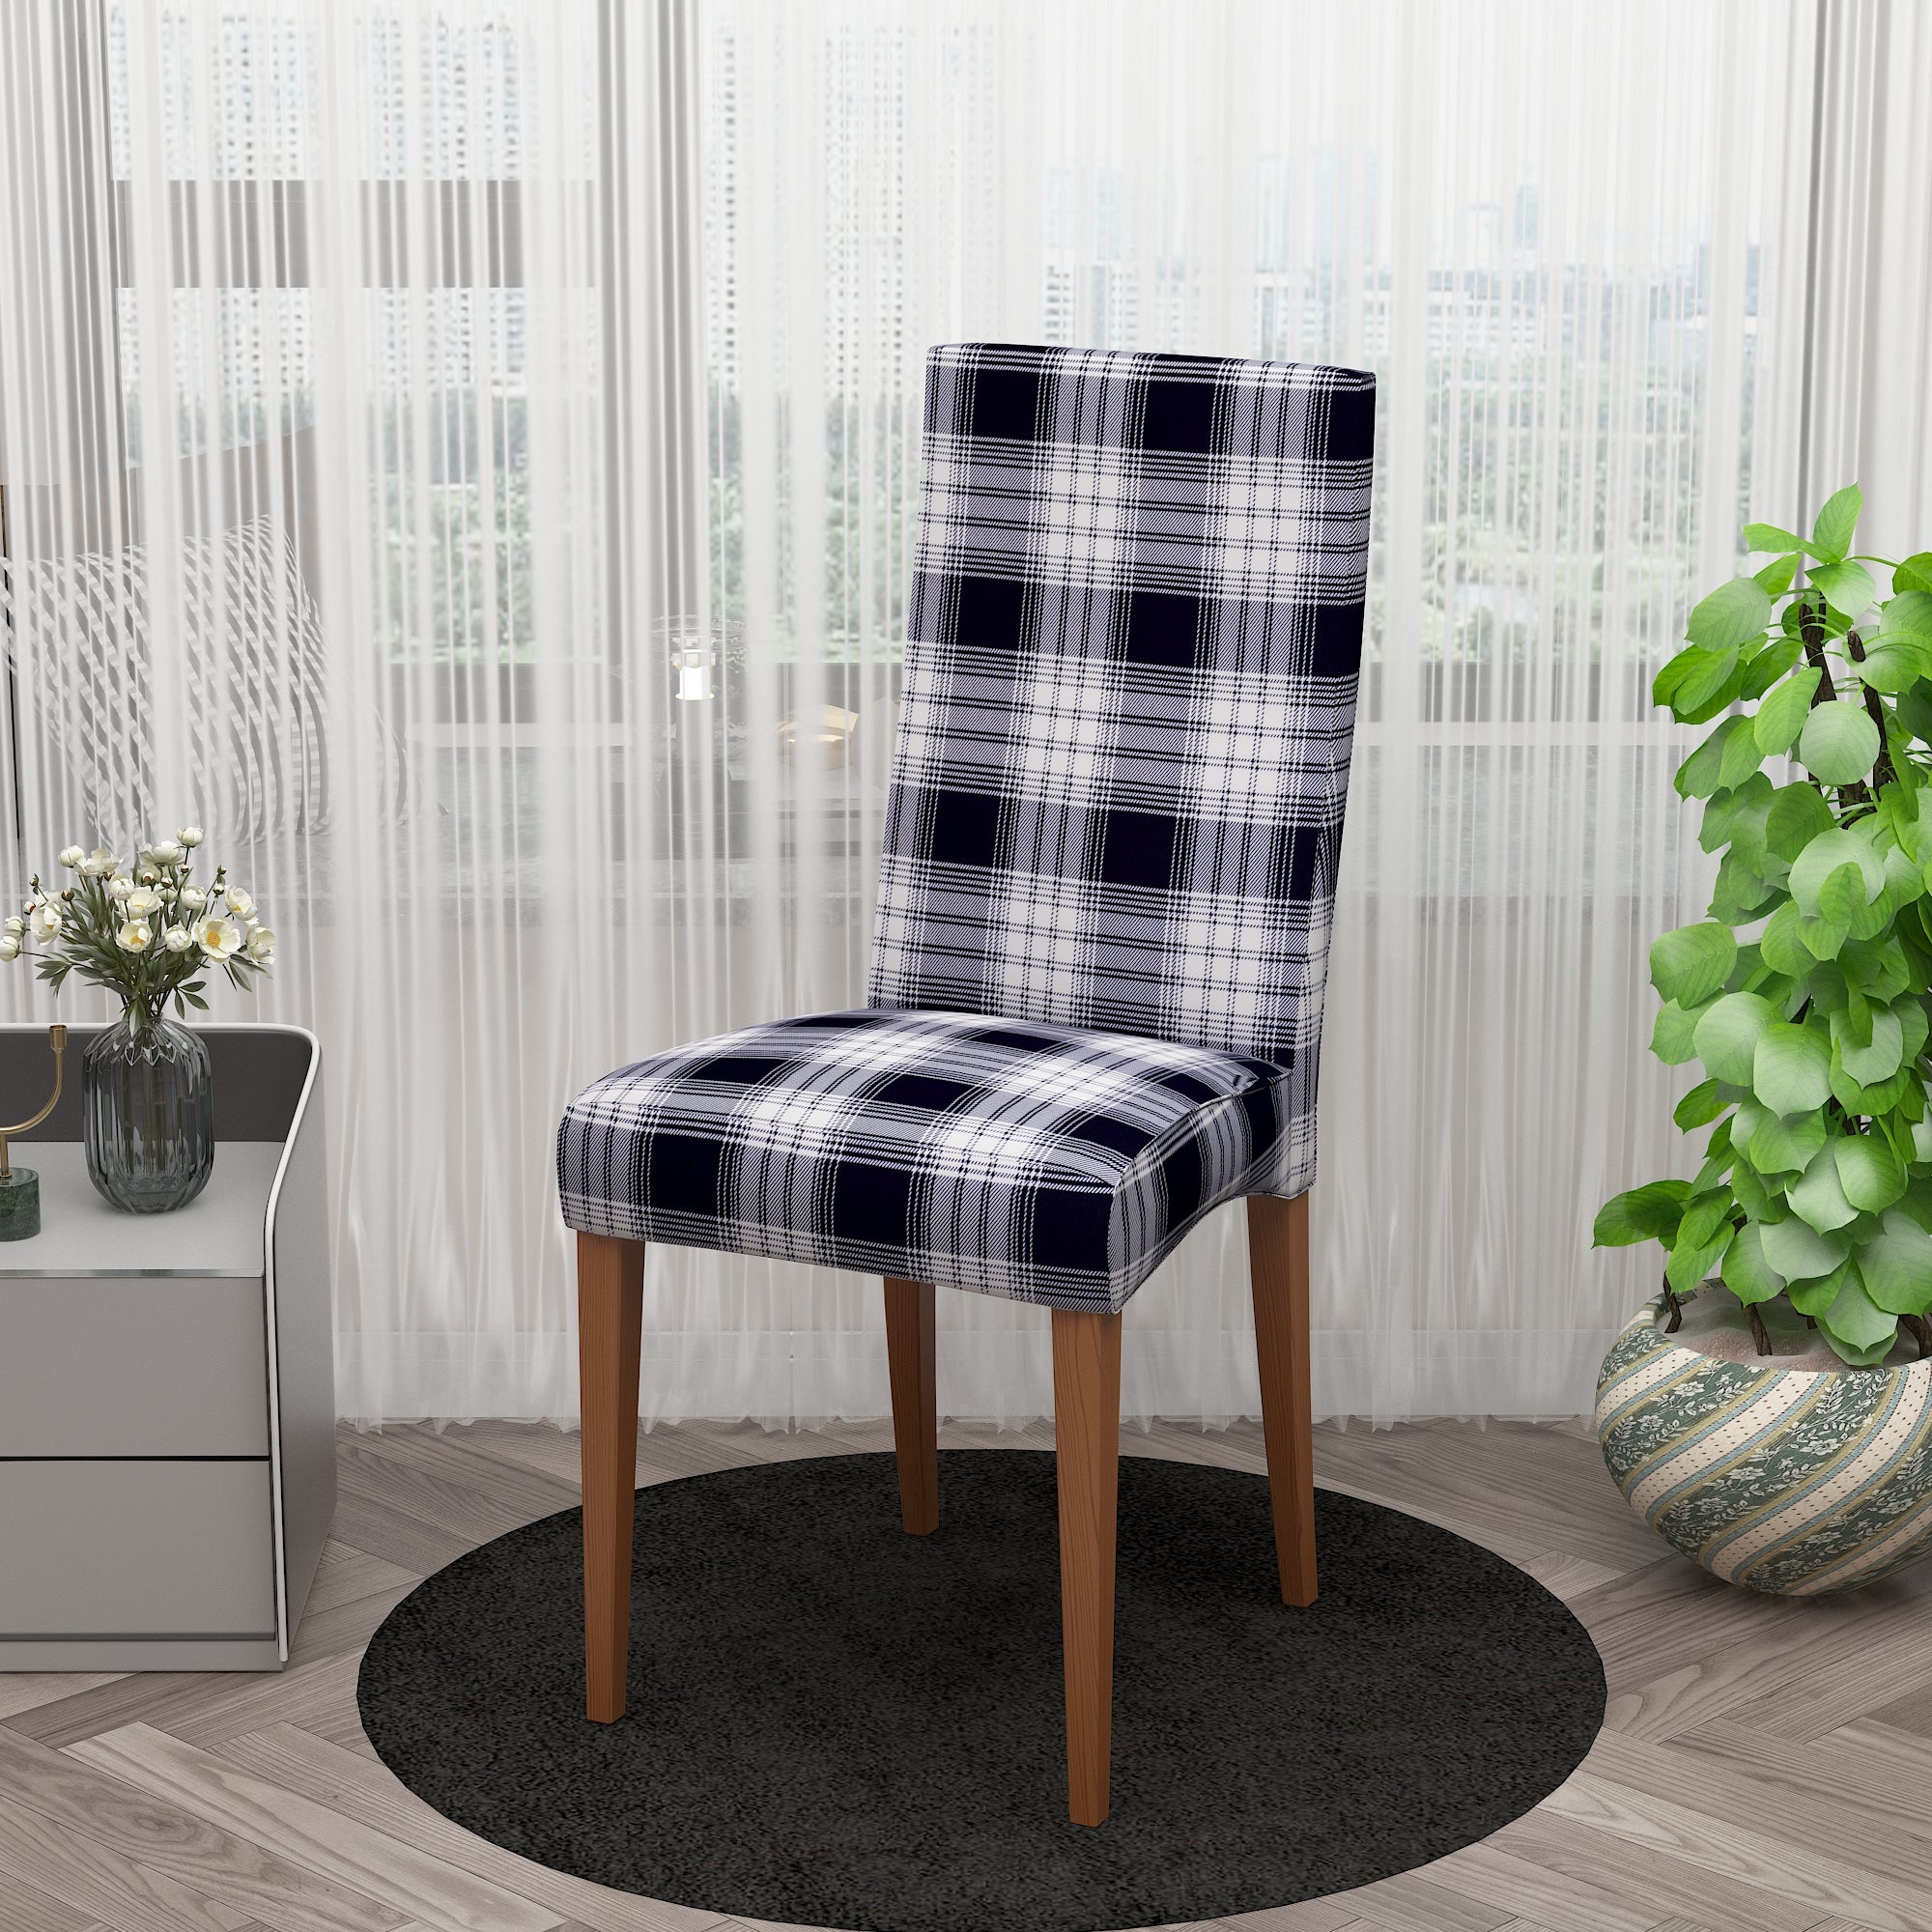 Polyester Spandex Stretchable Printed Chair Cover, MG08